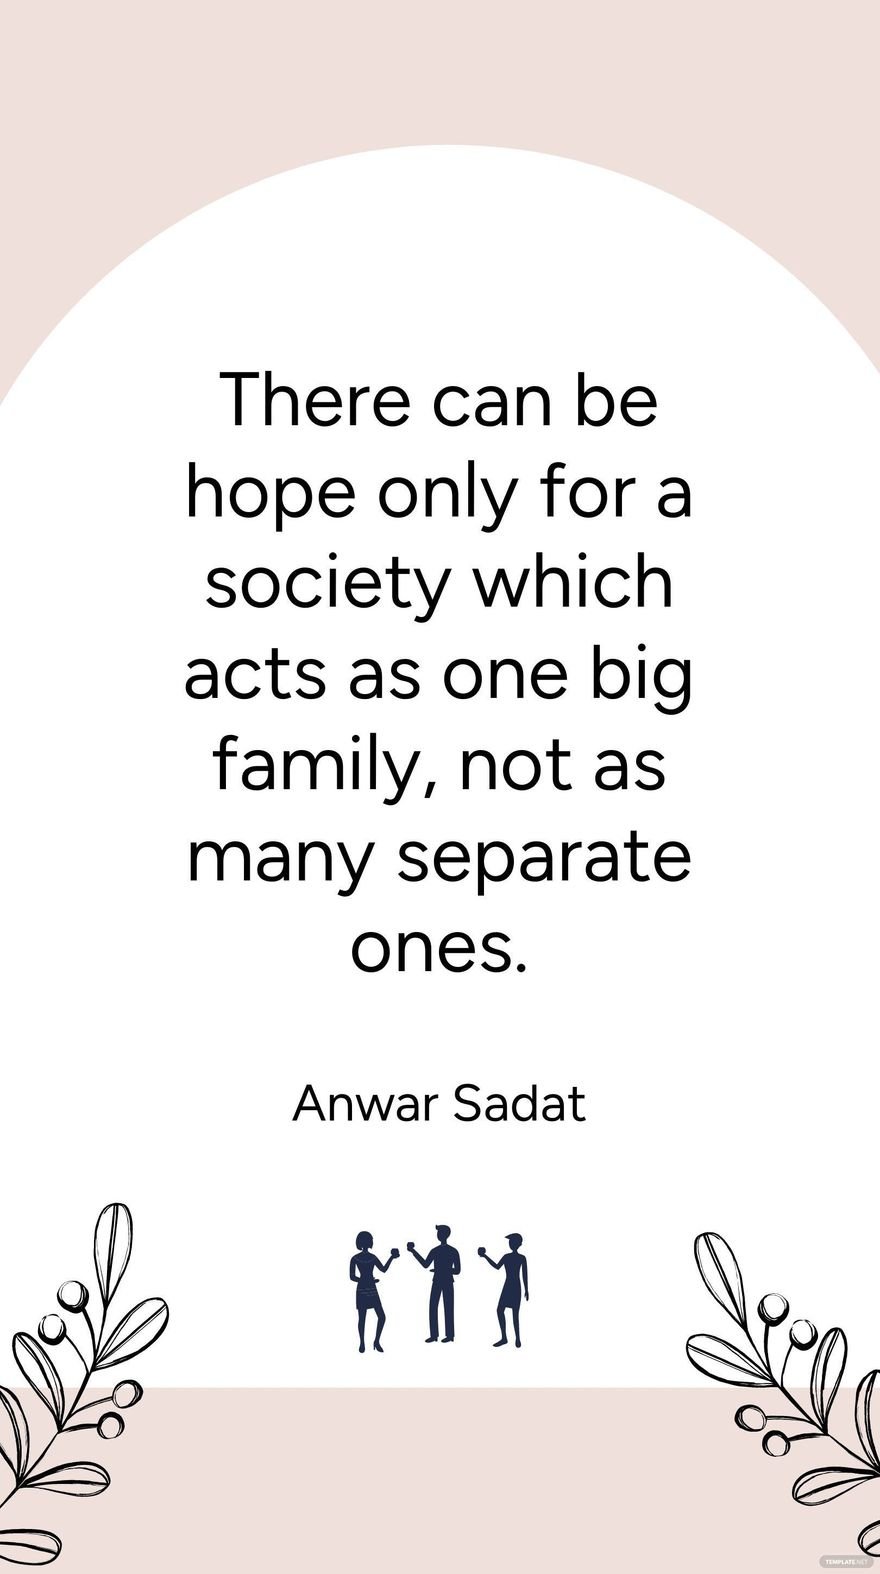 Free Anwar Sadat - There can be hope only for a society which acts as one big family, not as many separate ones. in JPG